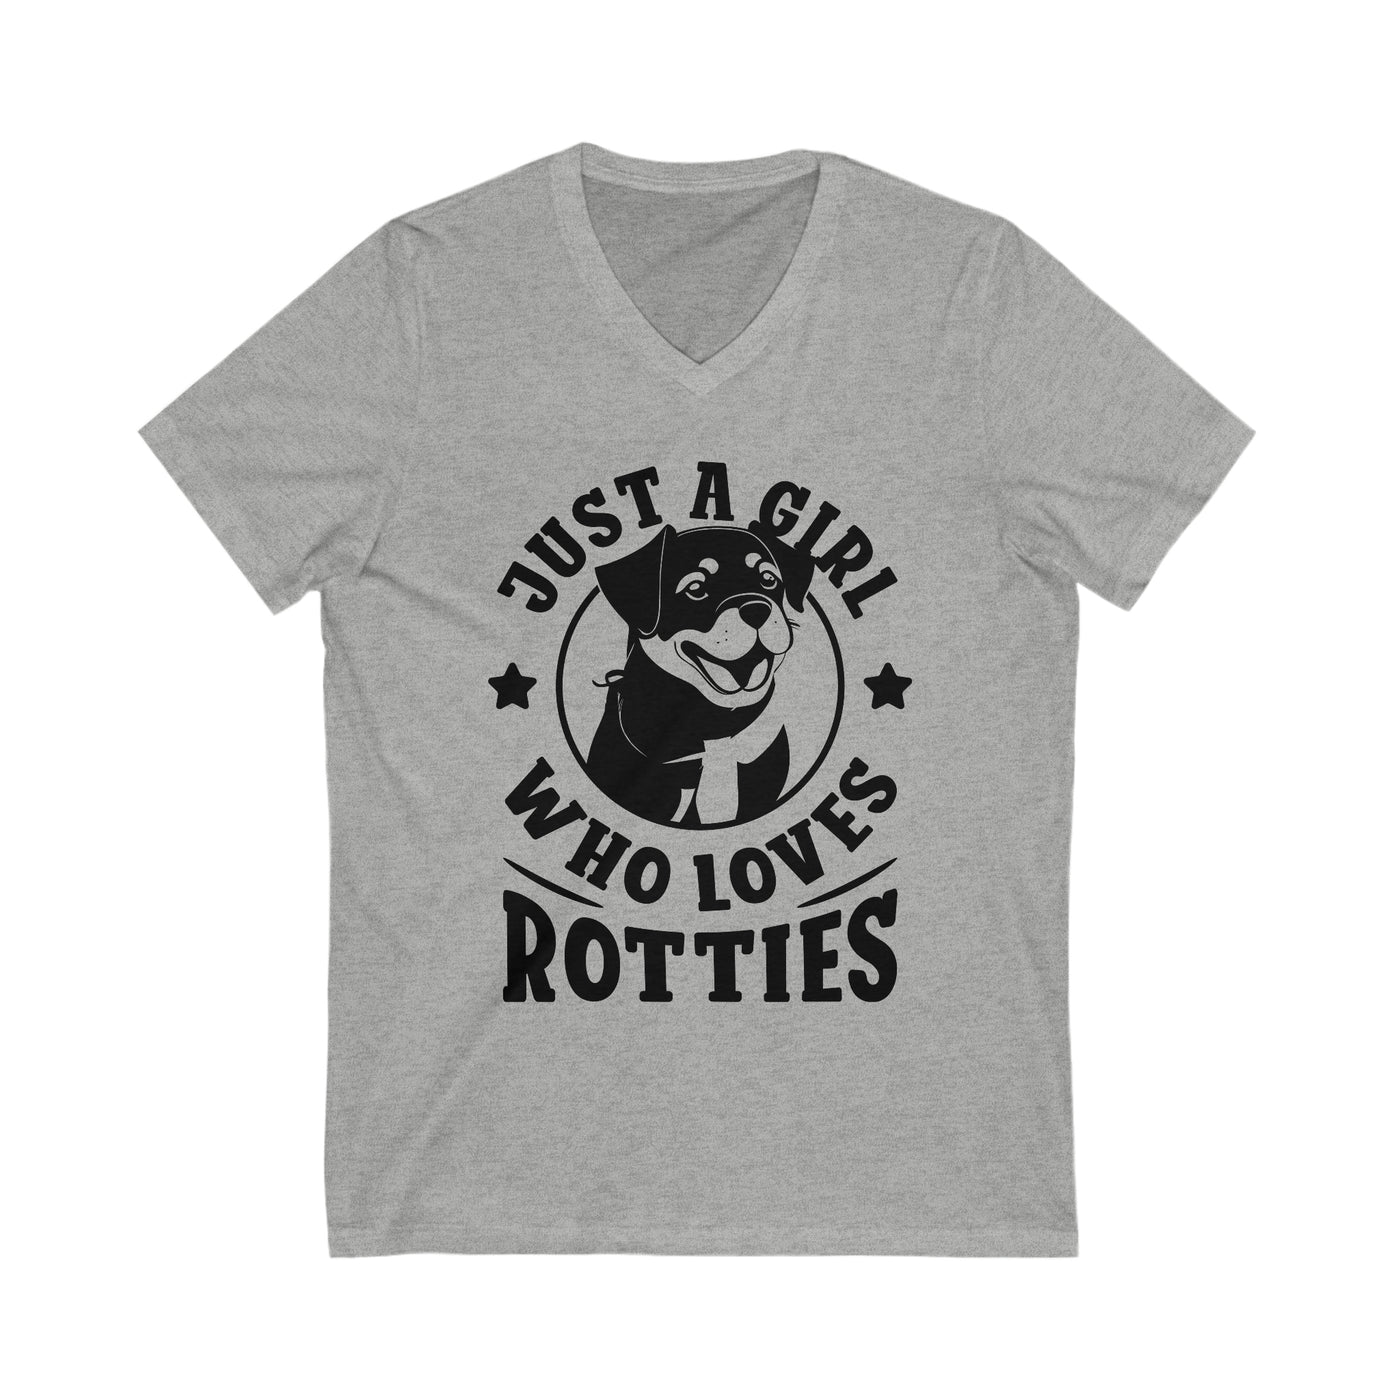 Just A Girl Who Loves Rotties V-Neck